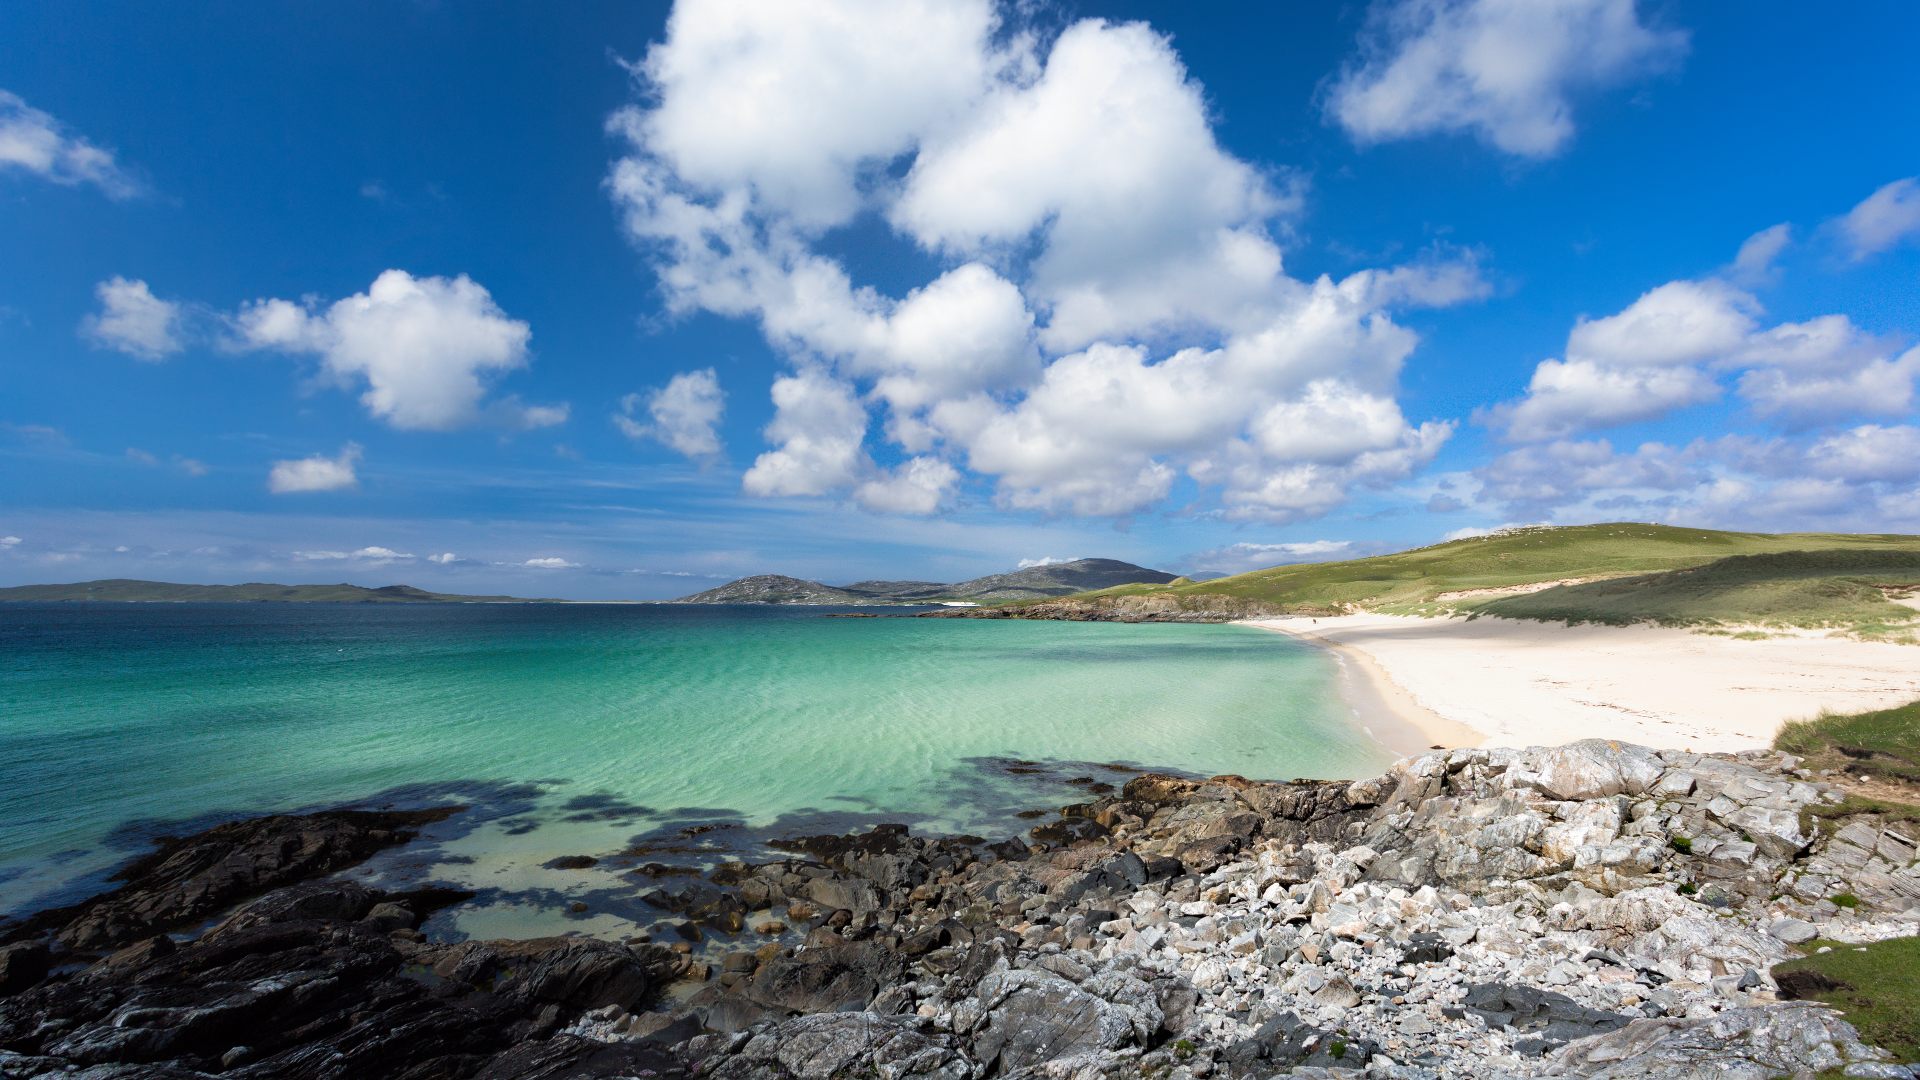 Luskentyre, one of the best beaches in Scotland